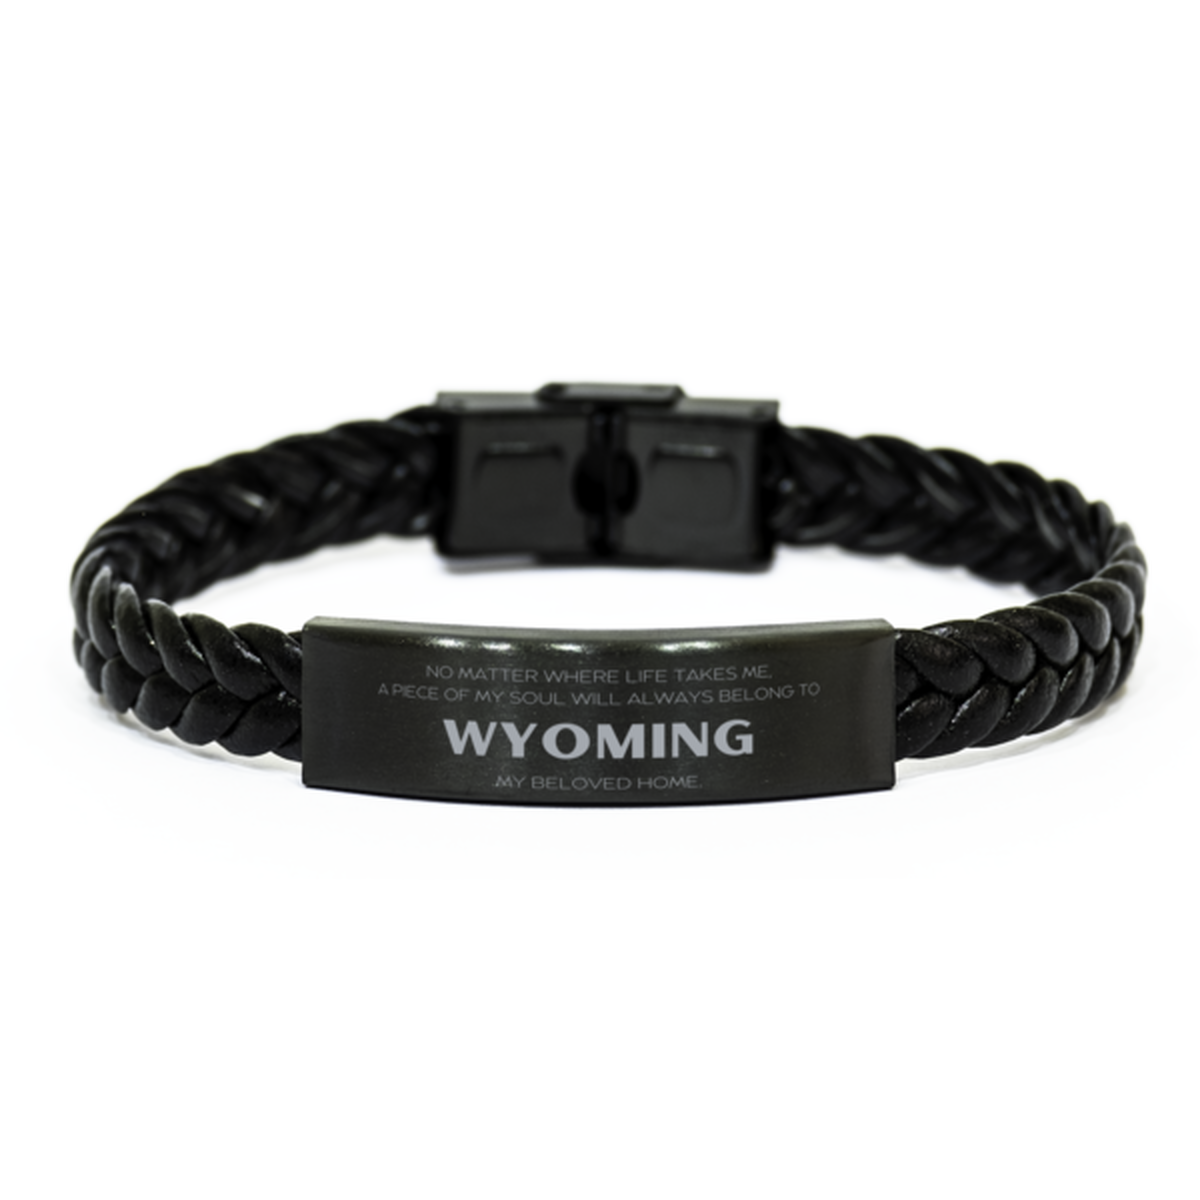 Love Wyoming State Gifts, My soul will always belong to Wyoming, Proud Braided Leather Bracelet, Birthday Unique Gifts For Wyoming Men, Women, Friends